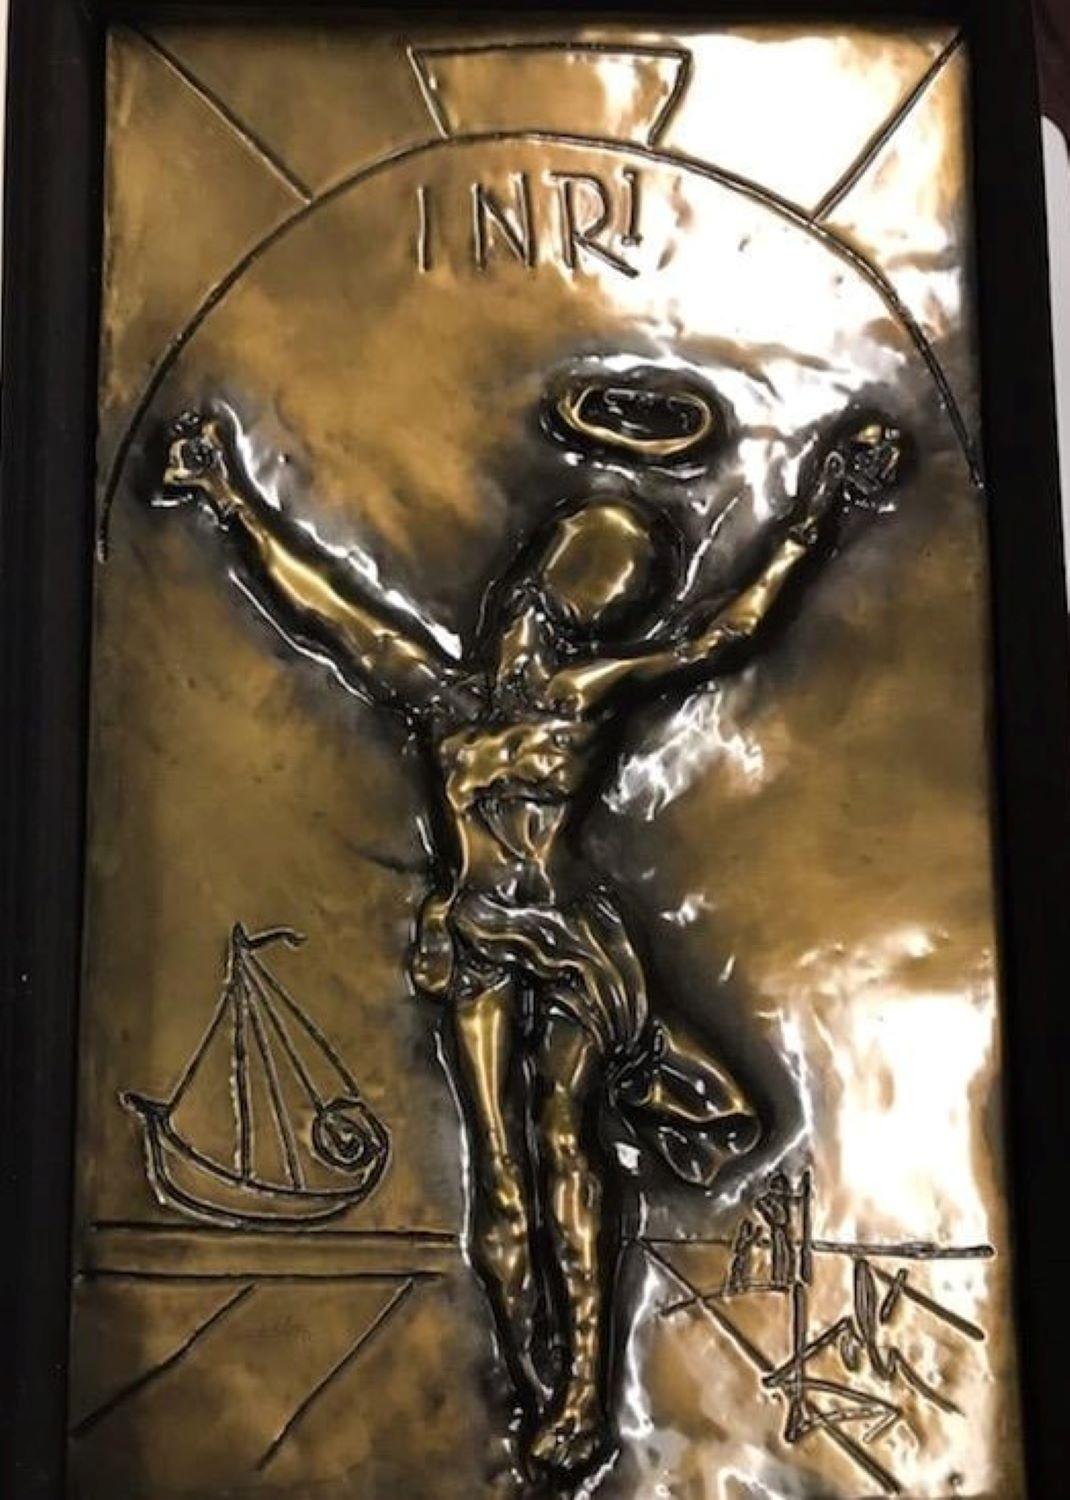 Salvador Dali BAS Relief Sculpture Gold Edition, Signed Dali Sculpture. Signed  E65/75. 
Christ Of St. John Of The Cross, a base relief sculpture by Salvador Dali with a Gold finish depicting crucifixion image of Christ with INRI above head and a